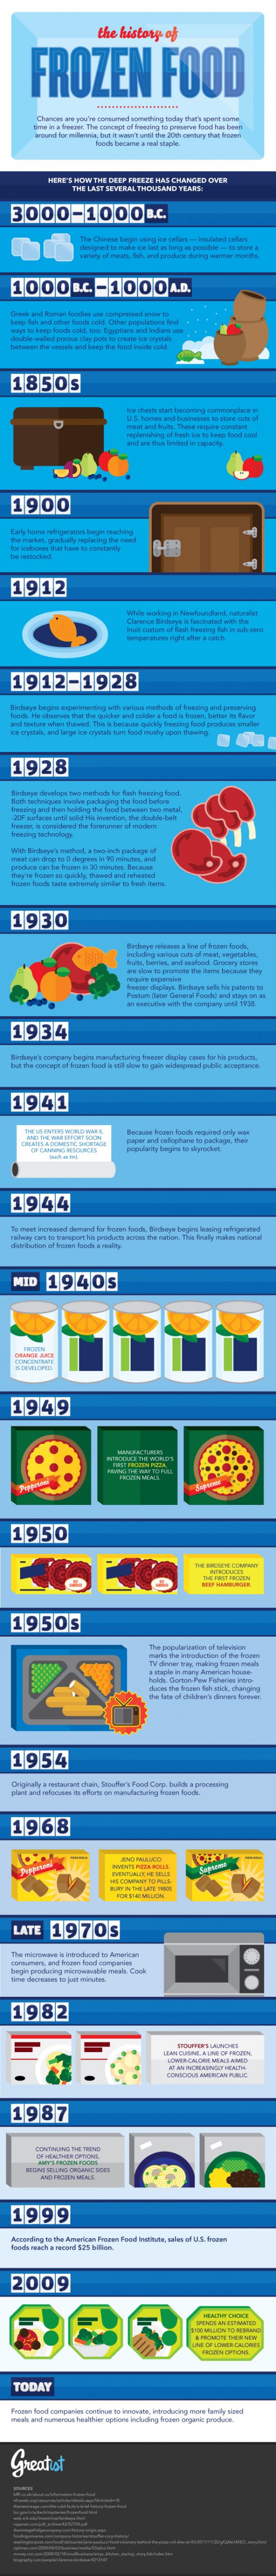 The History of Frozen Food [Infographic]